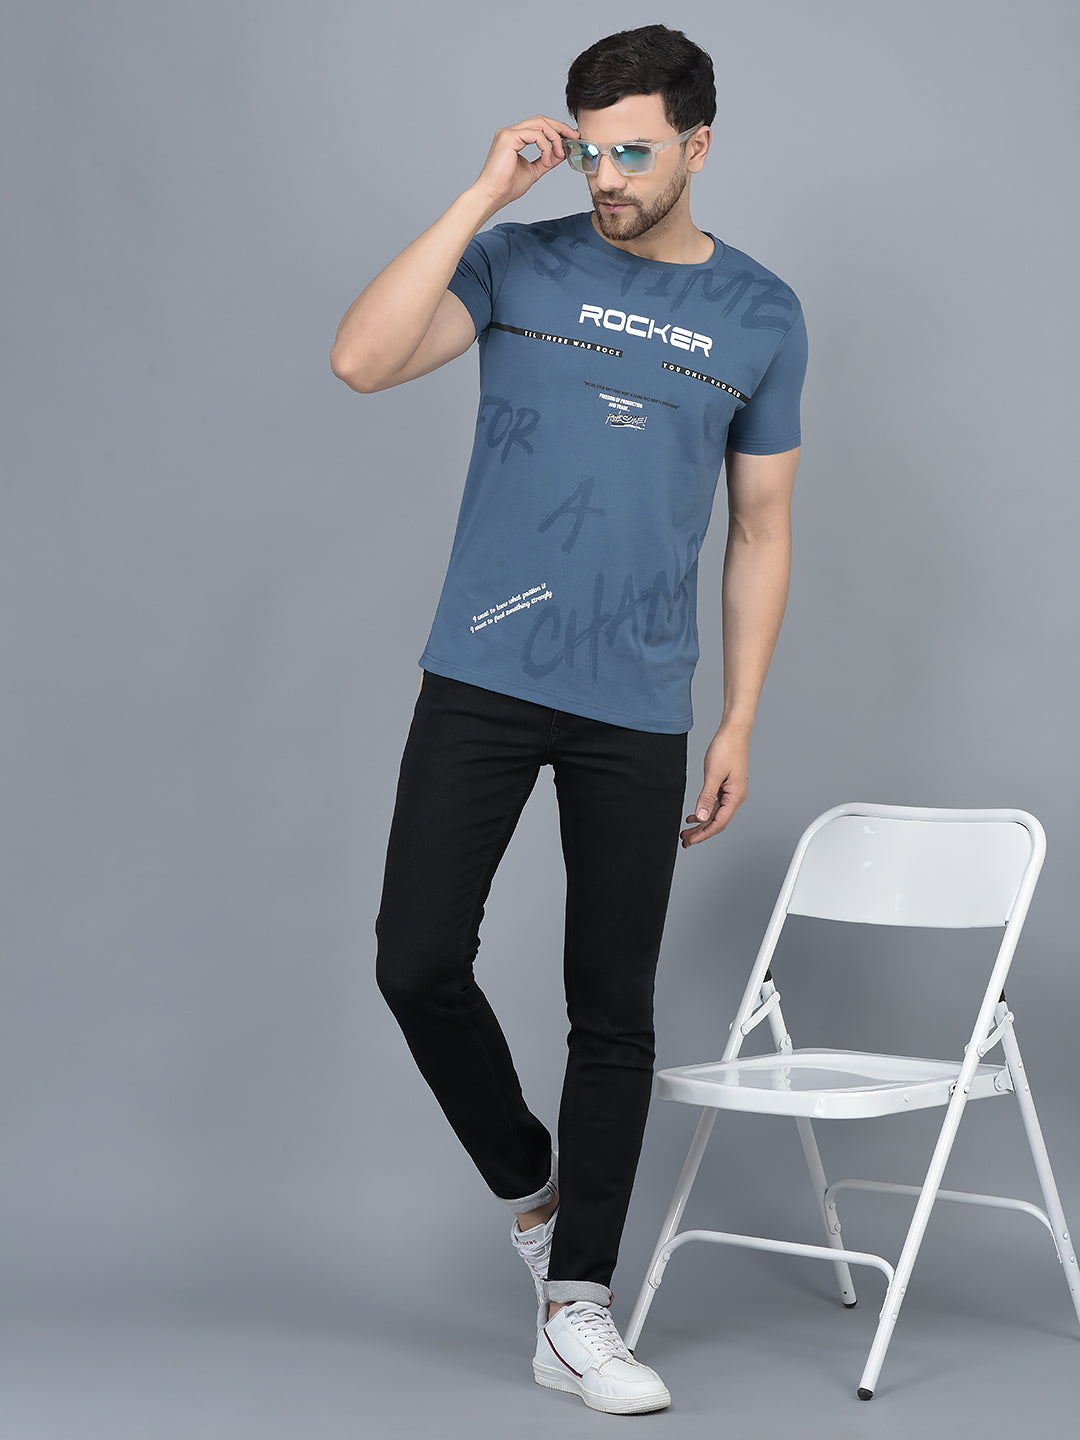 Plain Blue Mens Jeans T Shirt, Slim Fit at Rs 220/piece in Bellary | ID:  2848988567830